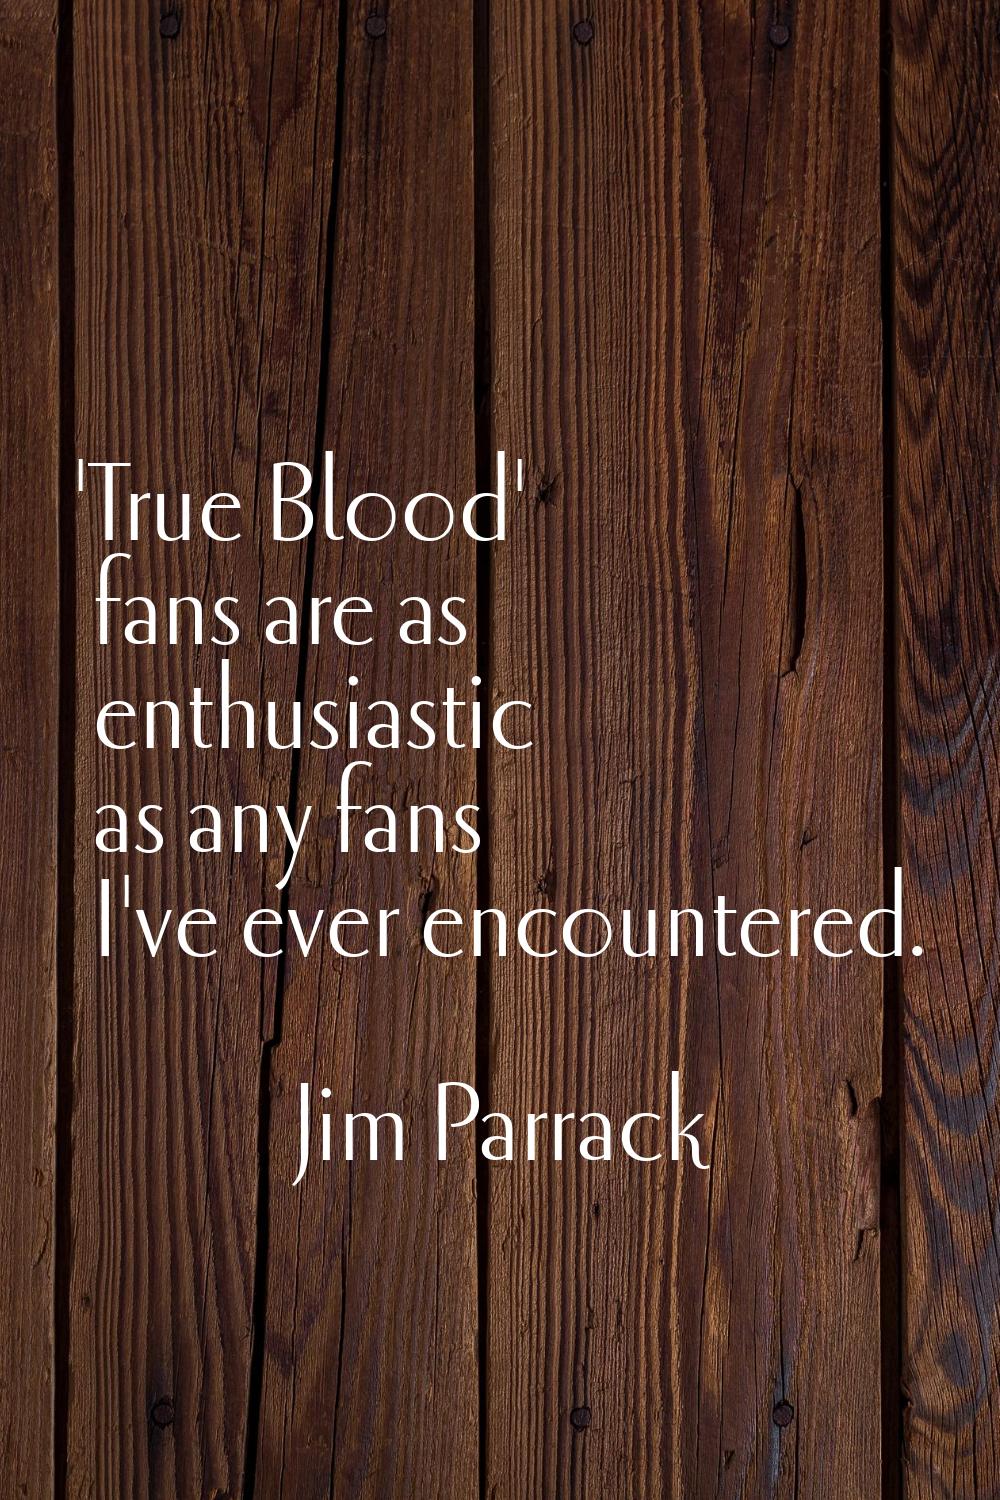 'True Blood' fans are as enthusiastic as any fans I've ever encountered.